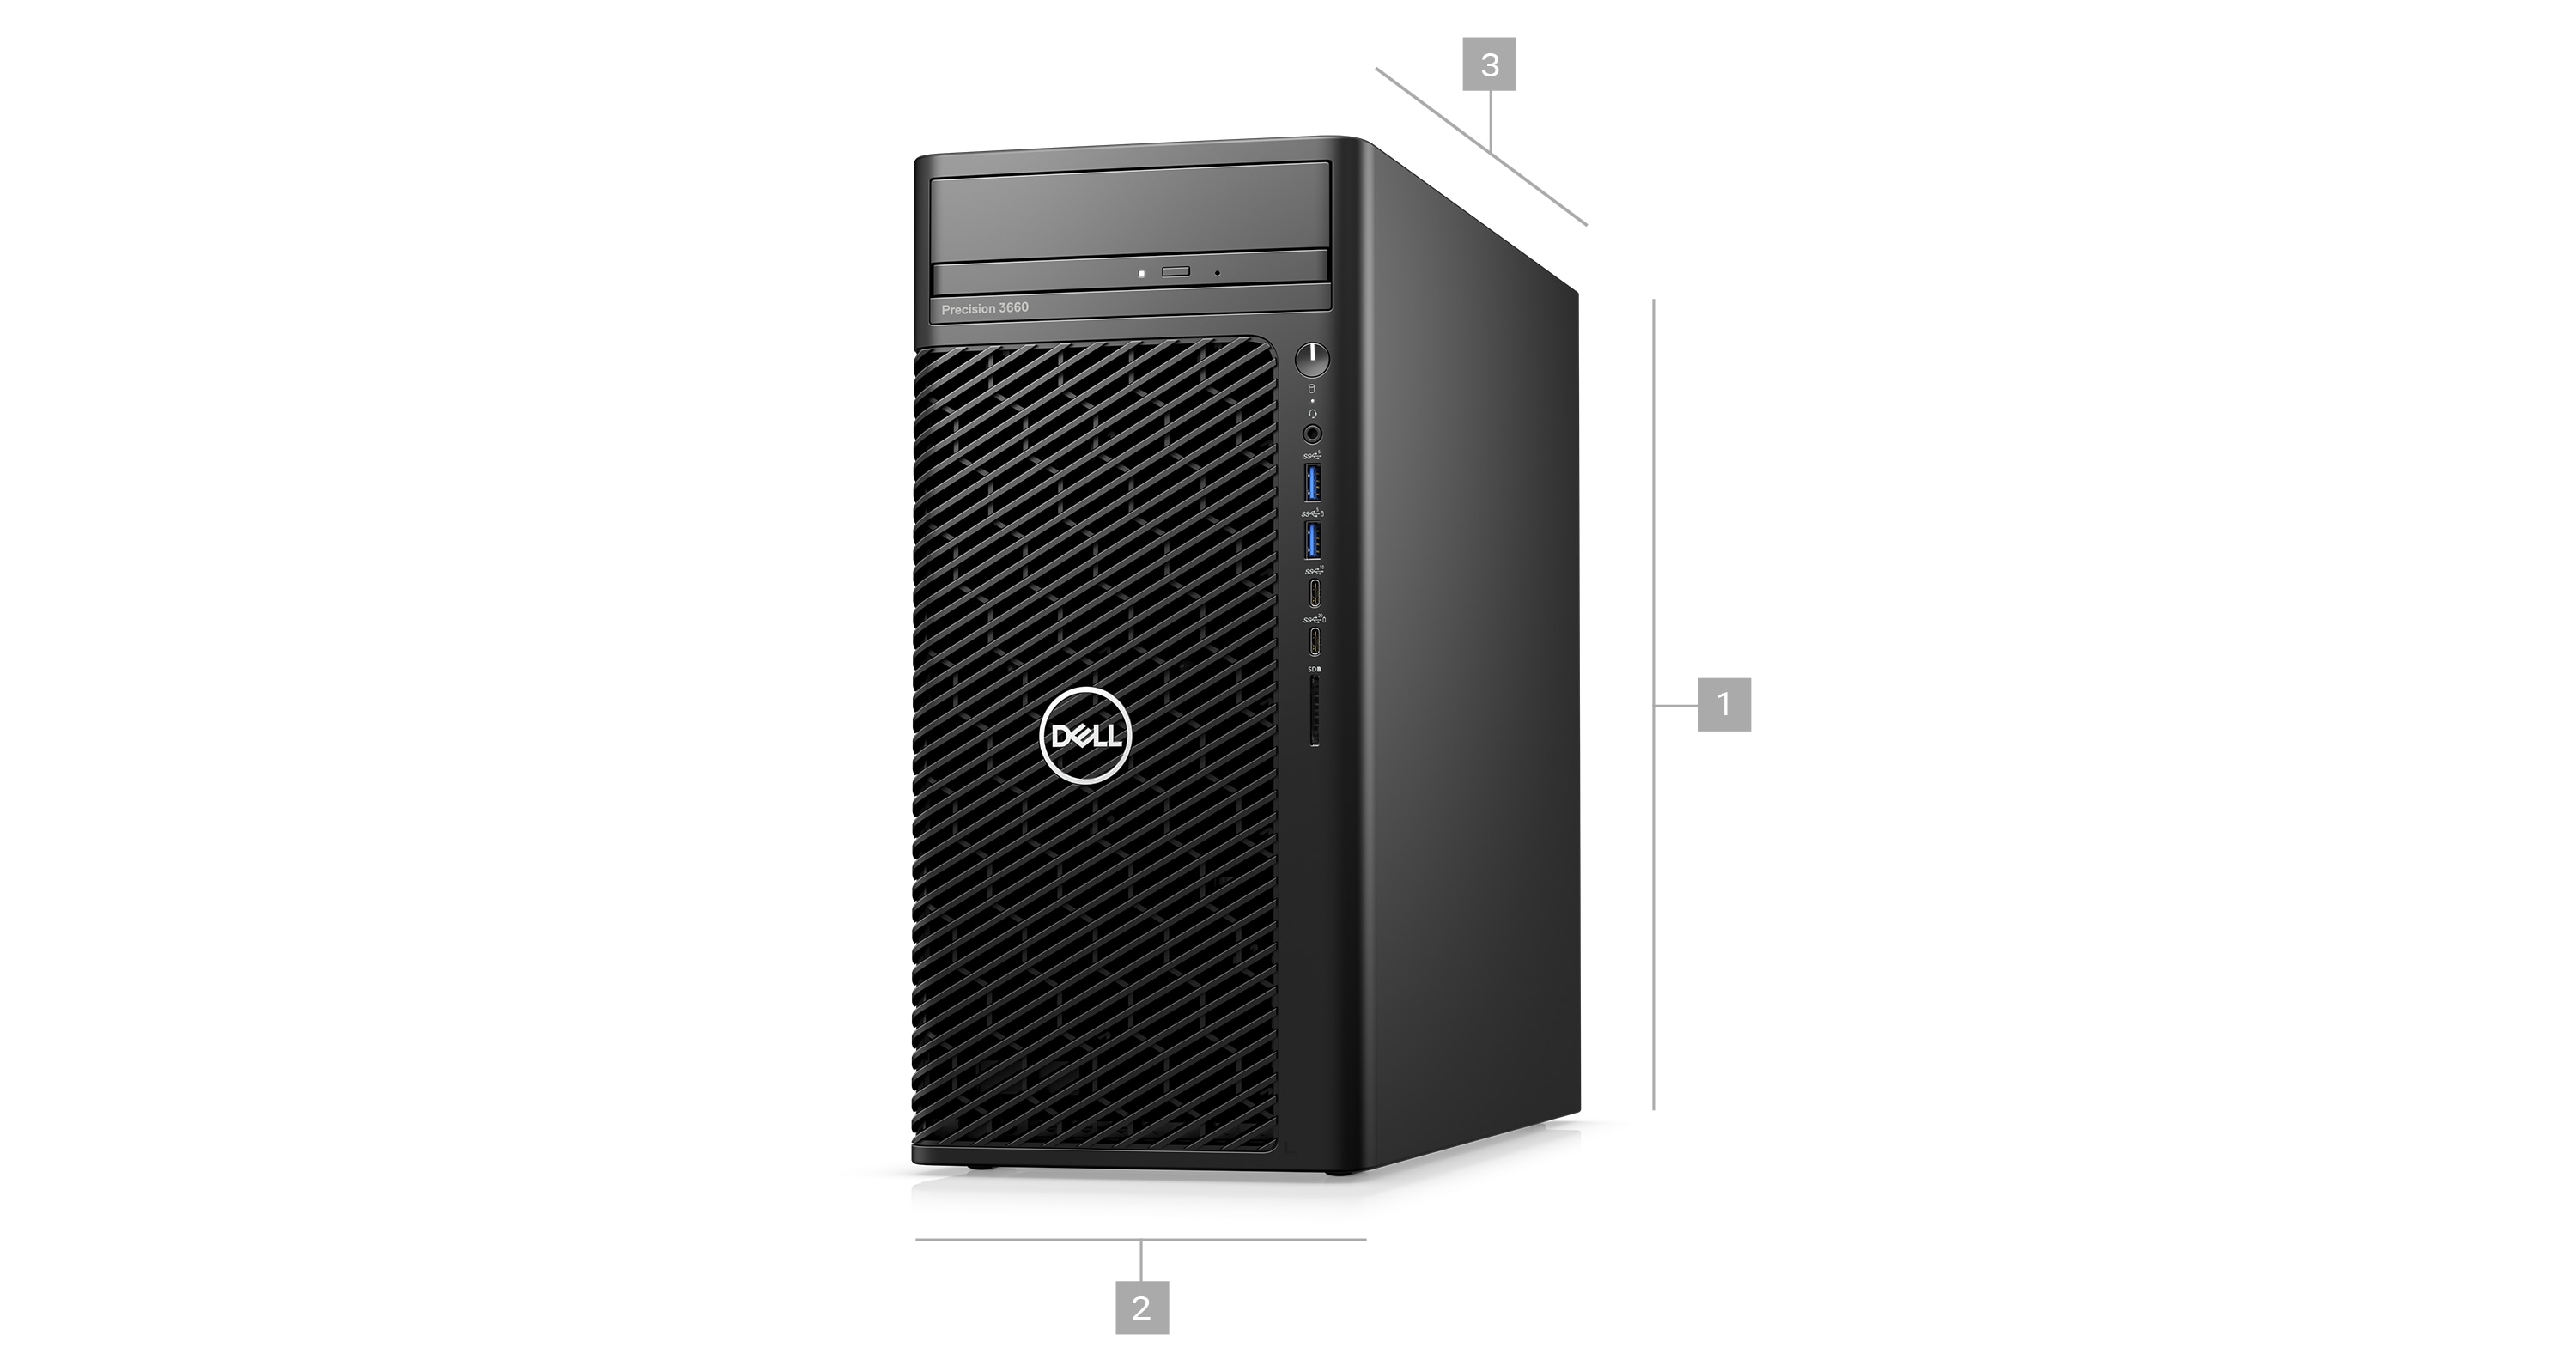 Picture of a Dell Precision 3660 Tower Workstation with numbers from 1 to 3 signaling product dimensions & weight.